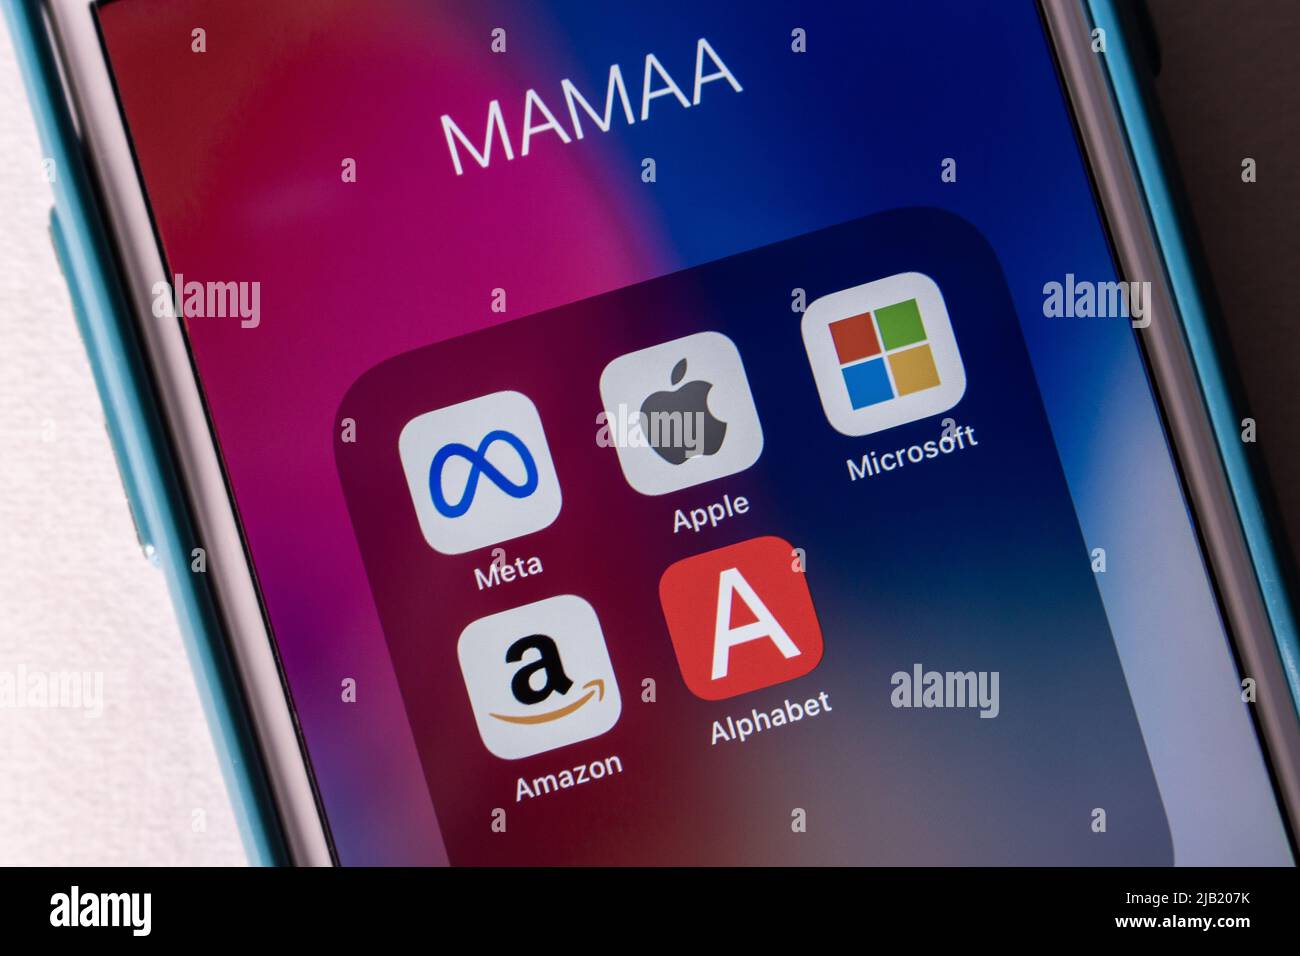 MAMAA, stands for Meta Platforms, Apple, Microsoft, Amazon, & Alphabet inc (Google's parent company), 5 US tech giants in the IT industry, on iPhone. Stock Photo